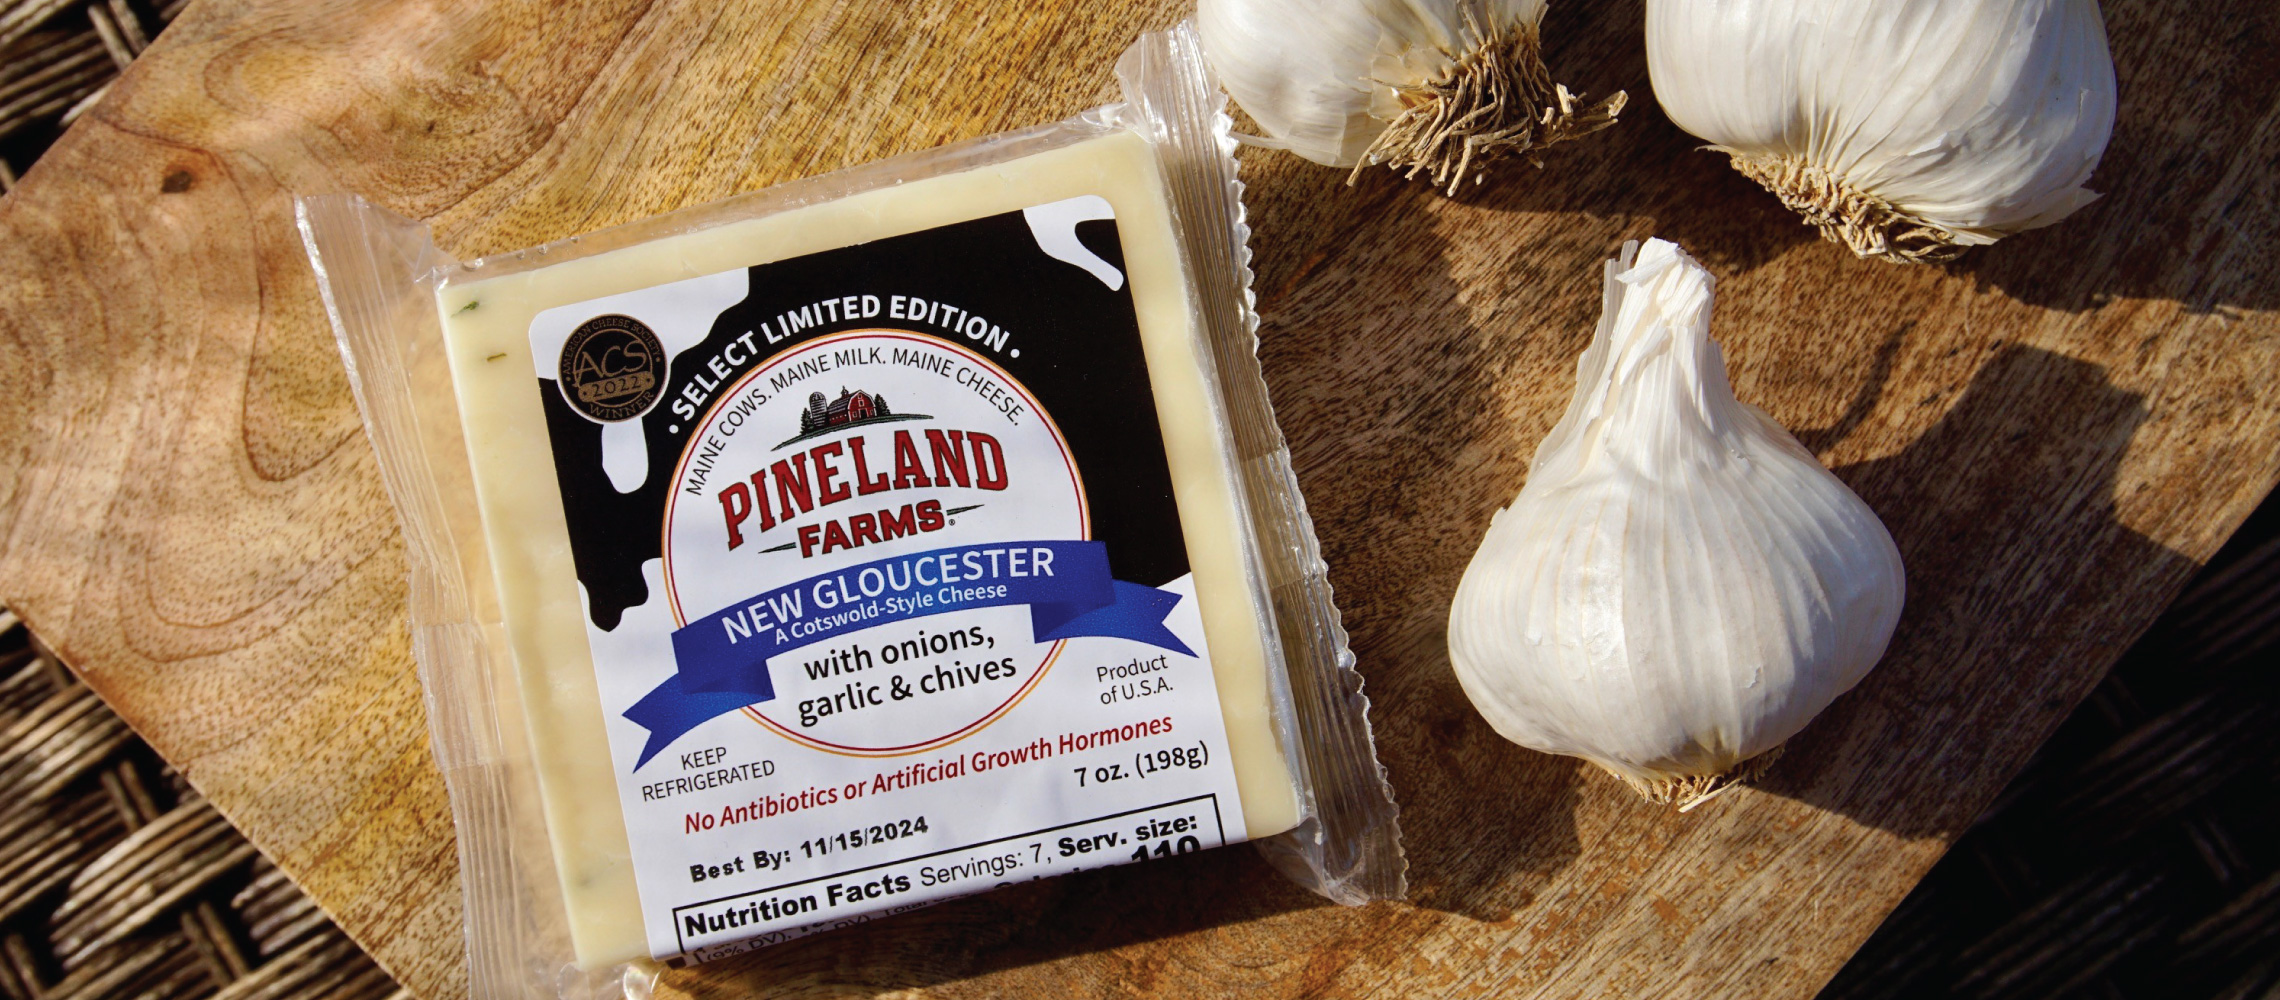 Pineland Farms New Gloucester Cheese